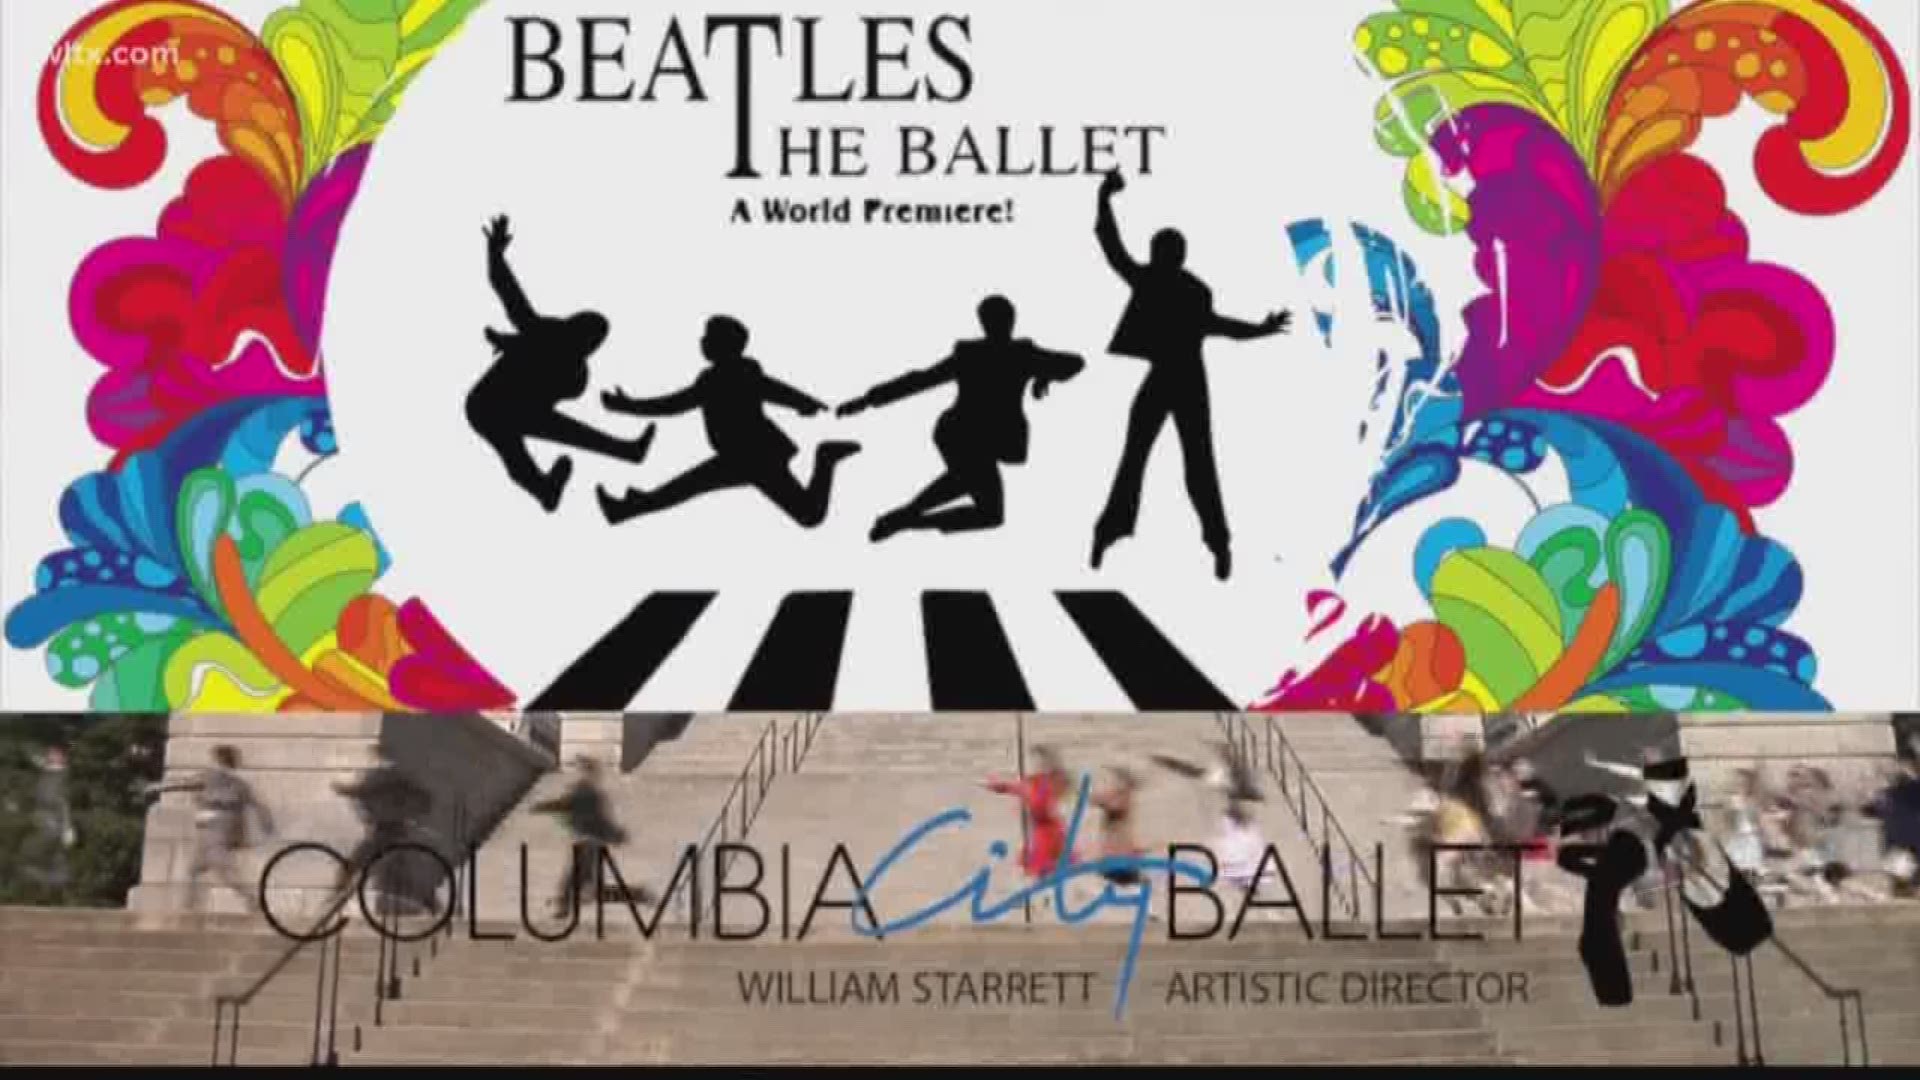 Columbia City Ballet is producing a World Premier Ballet based on the Beatles. The multimedia ballet will follow the story of the Beatles’ careers beginning in the 1960’s